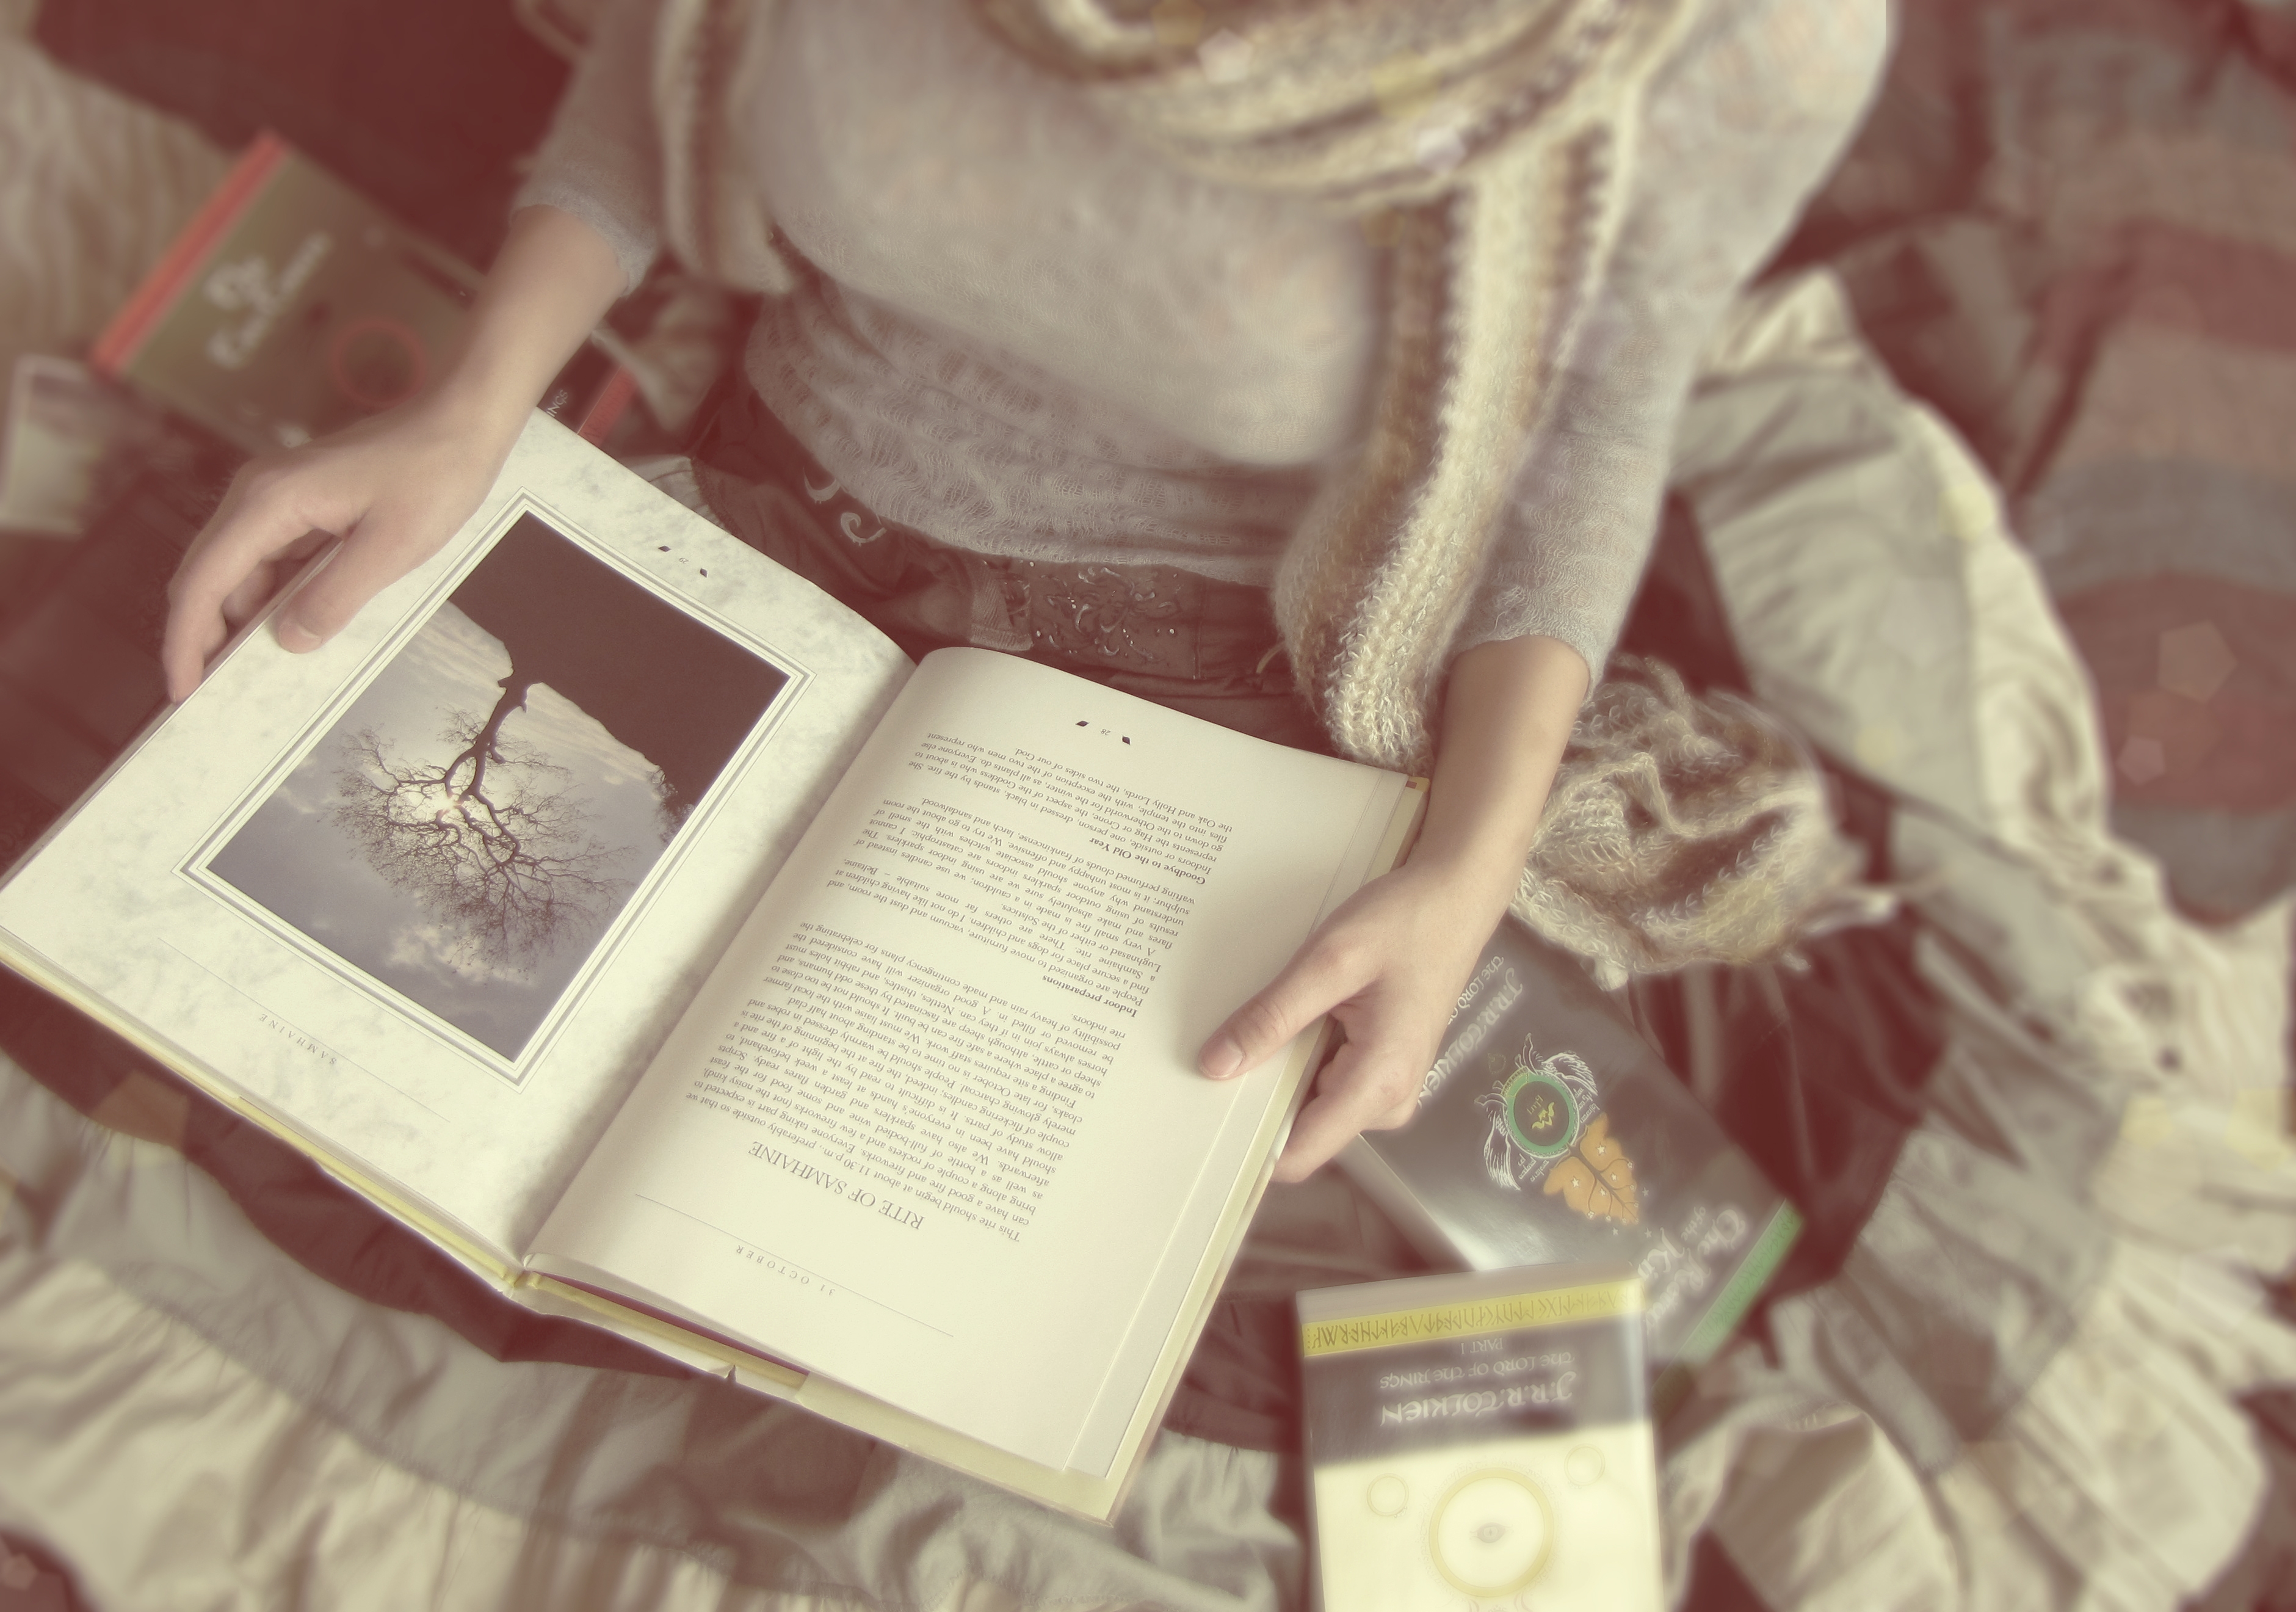 miscellanea, books, miscellaneous, blur, smooth, hands, girl, mood, reading